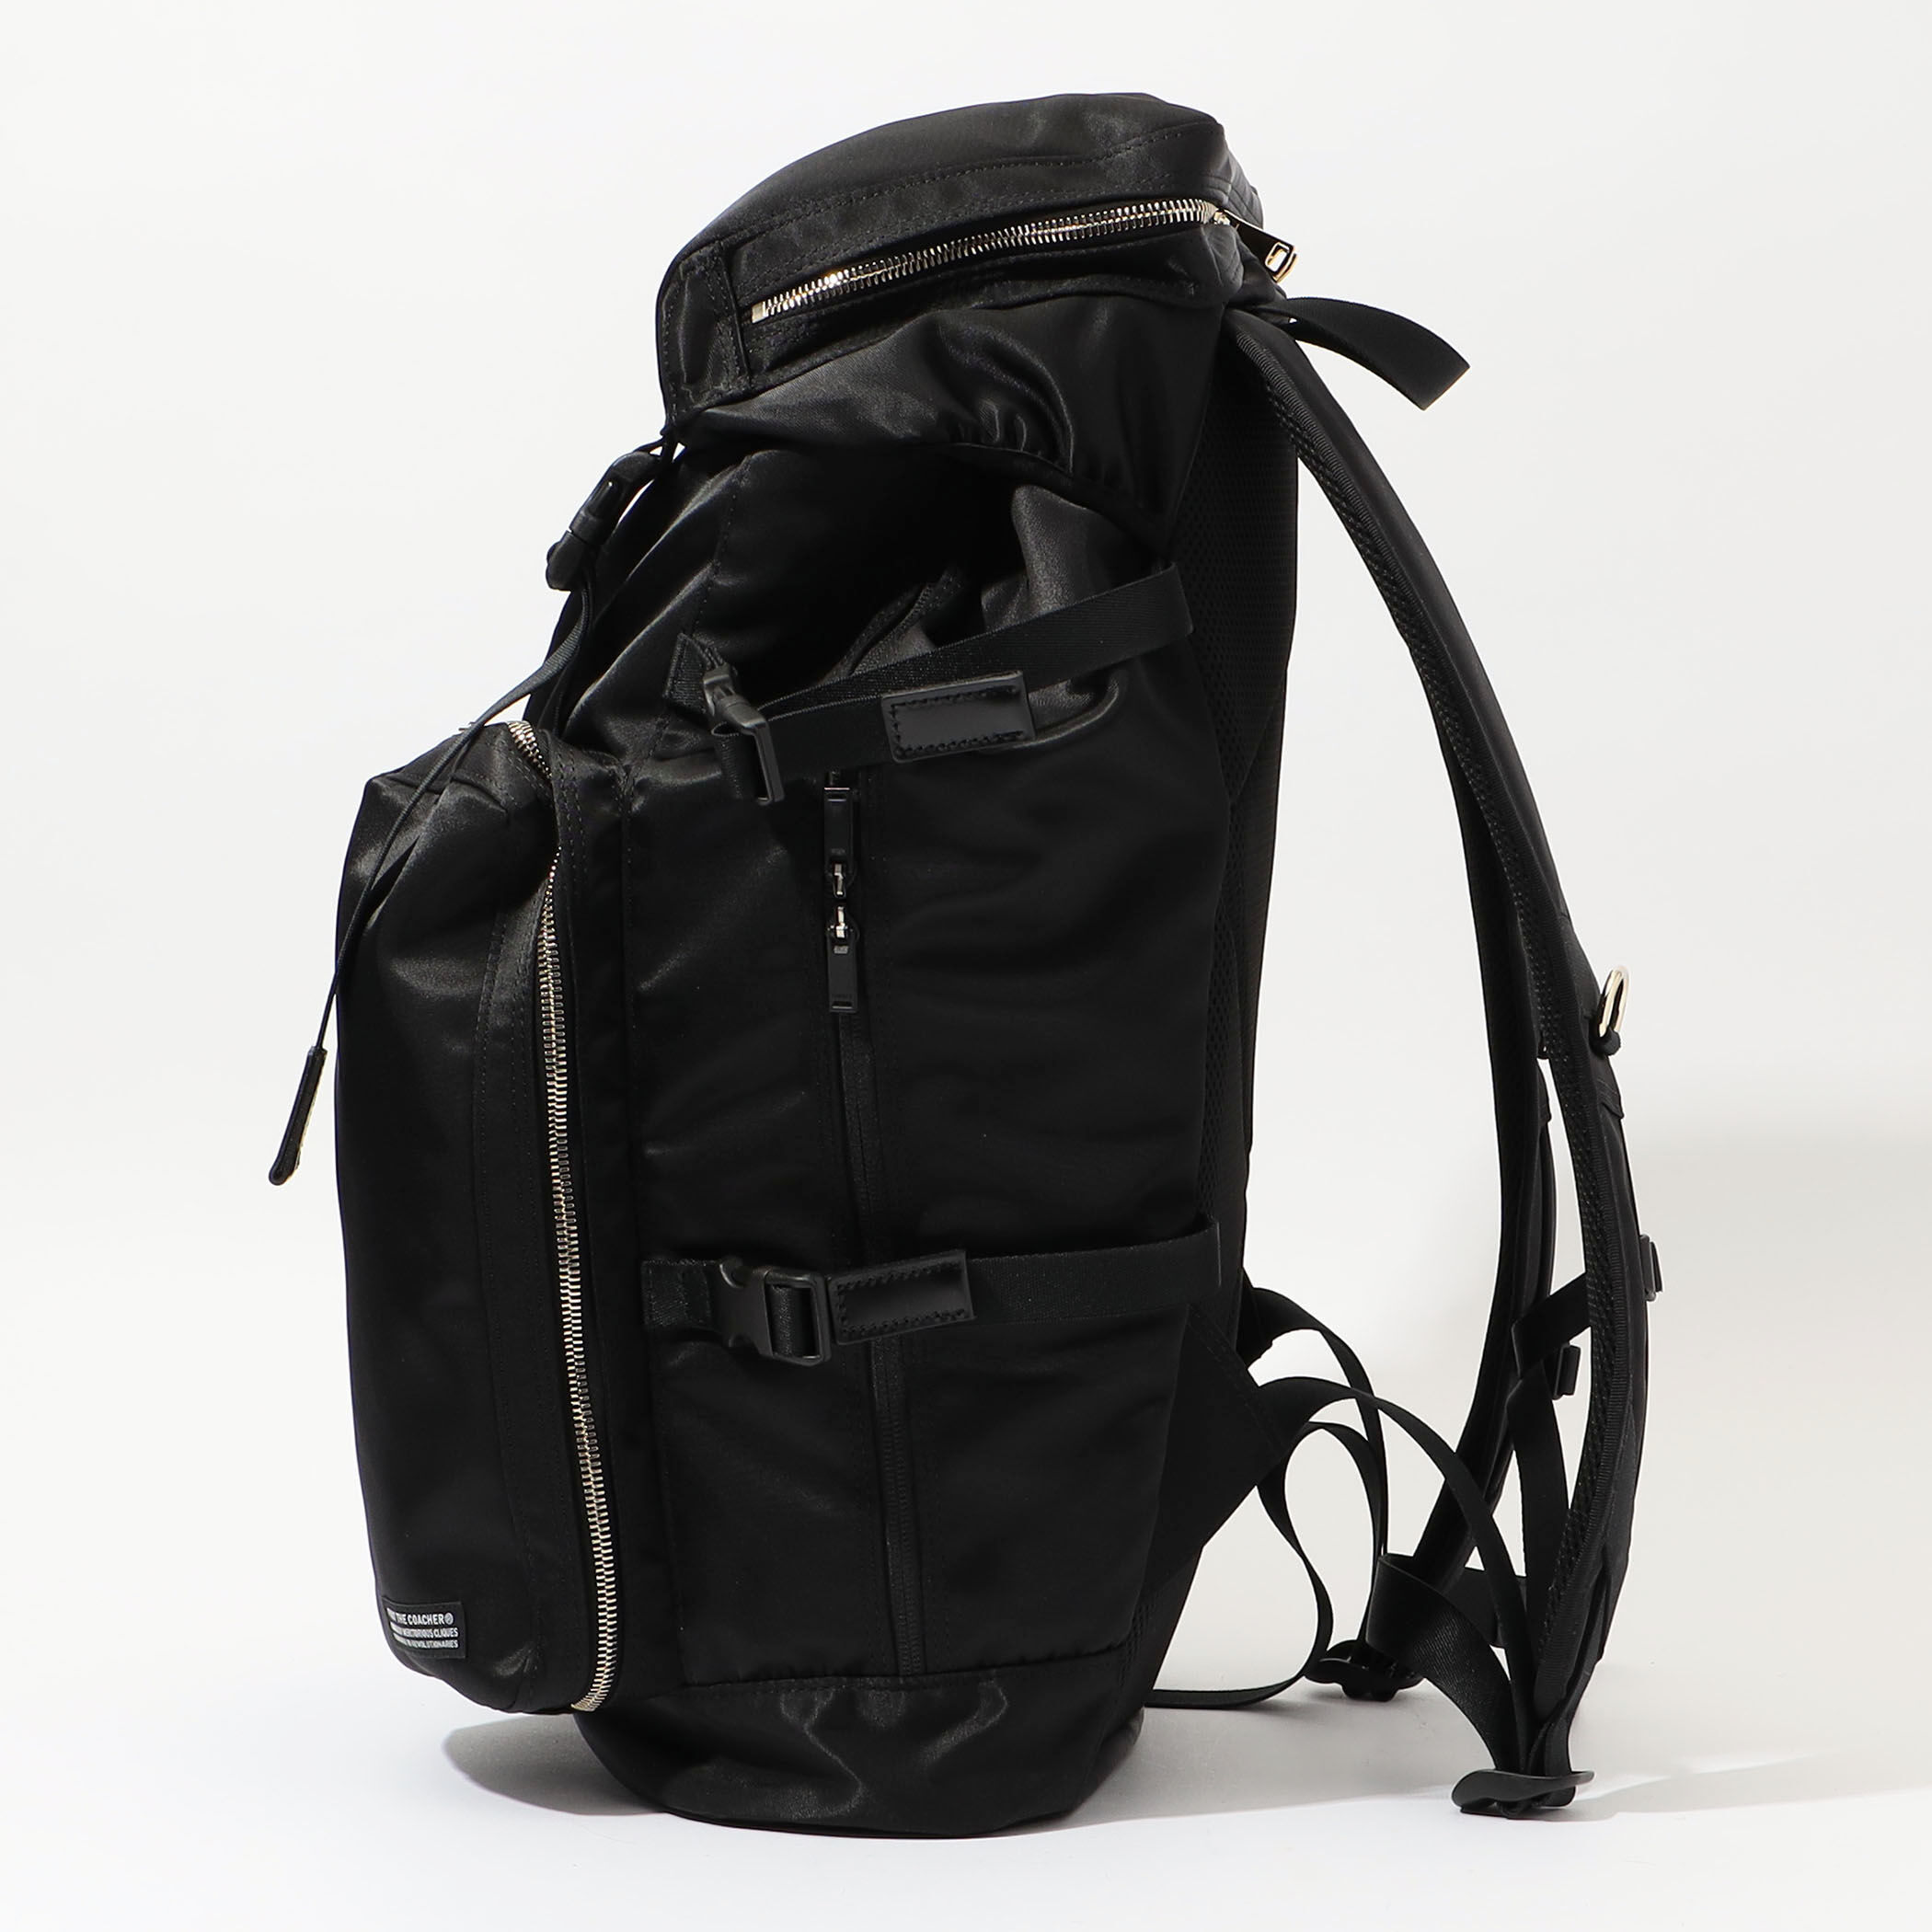 foot the coacher×PORTER MINIMAL BACK PACK ナイロン バックパック ...